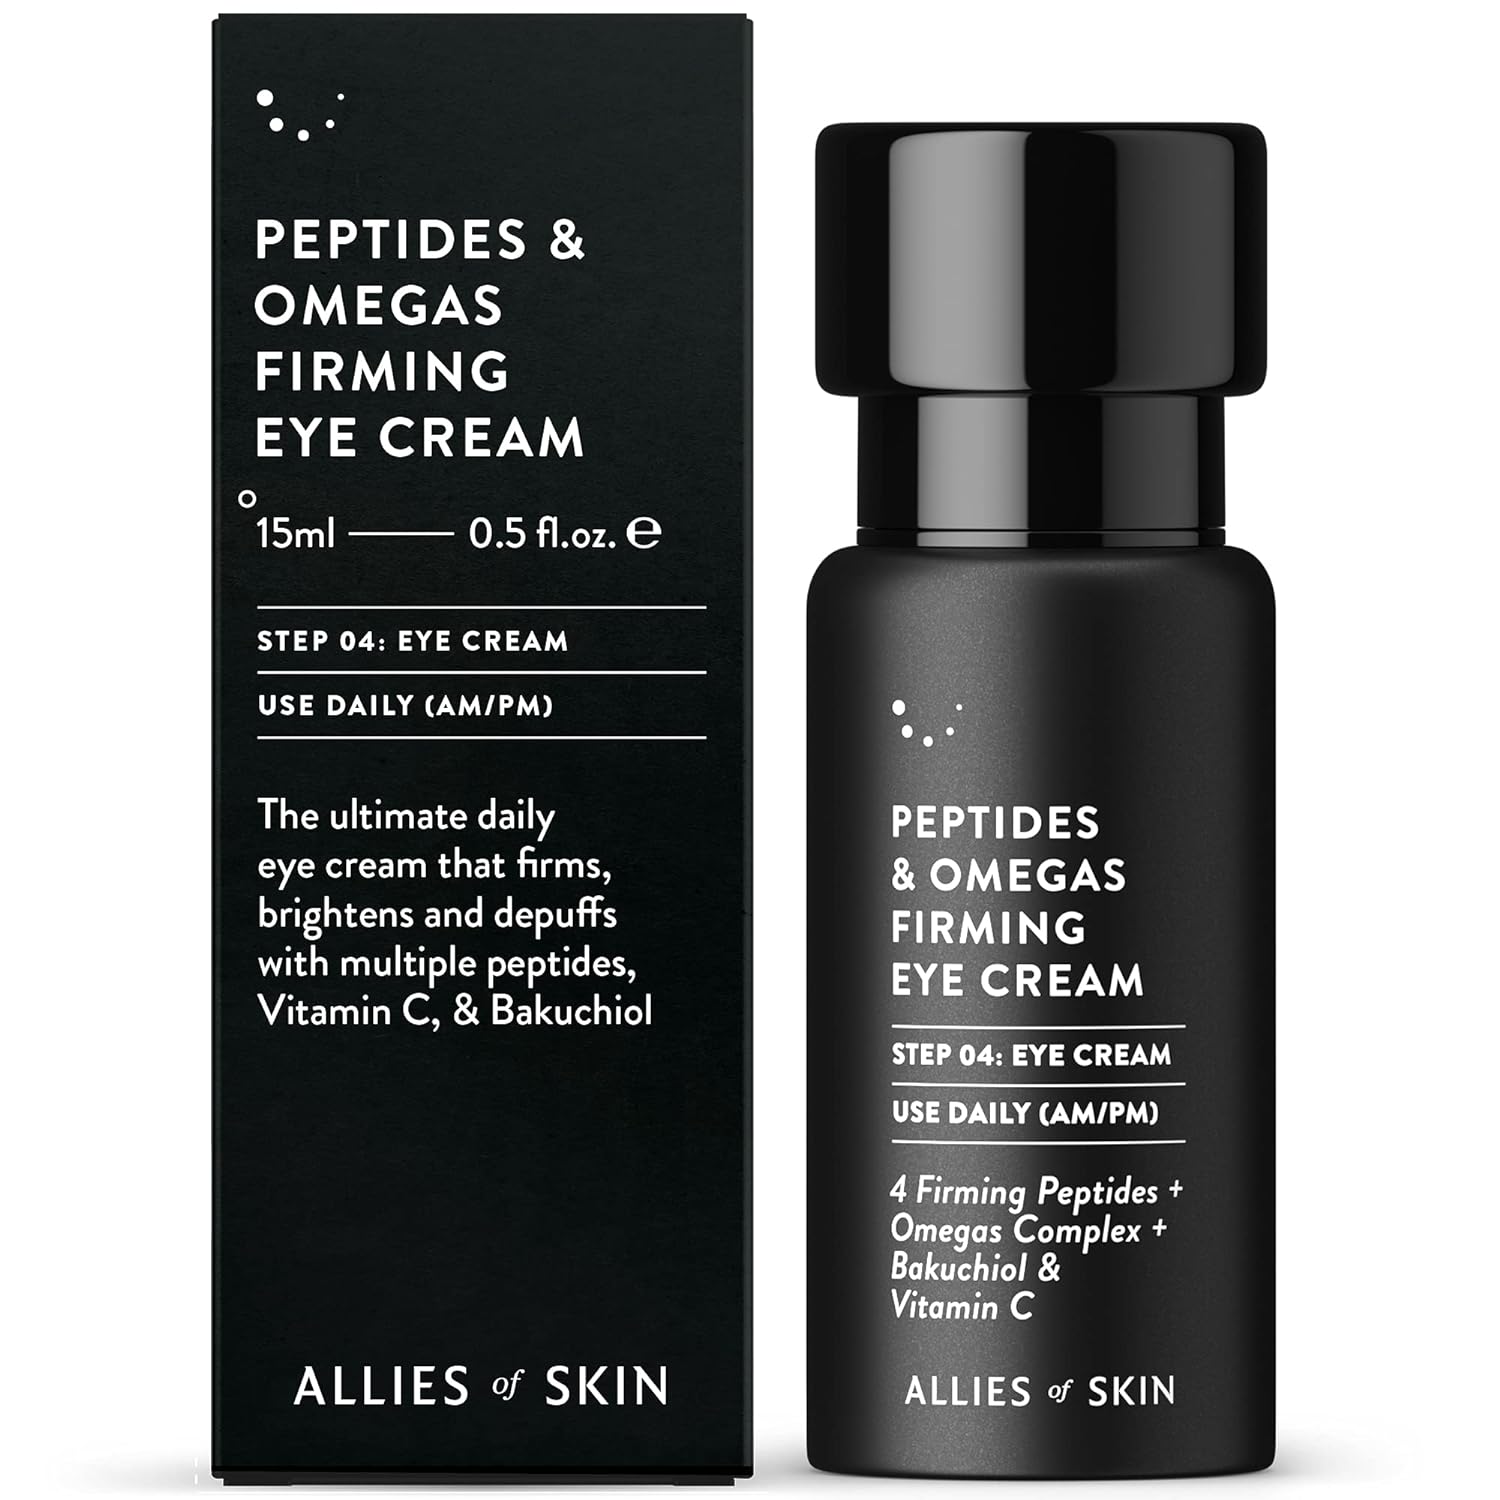 Allies of Skin Peptides & Omegas Firming Eye Cream: Vitamin C, Bakuchiol, Ceramide. For Dark Circles, Wrinkles & Puffiness. Anti-Aging. Firms & Brightens Under Eye Area 0.5  / 15 ml